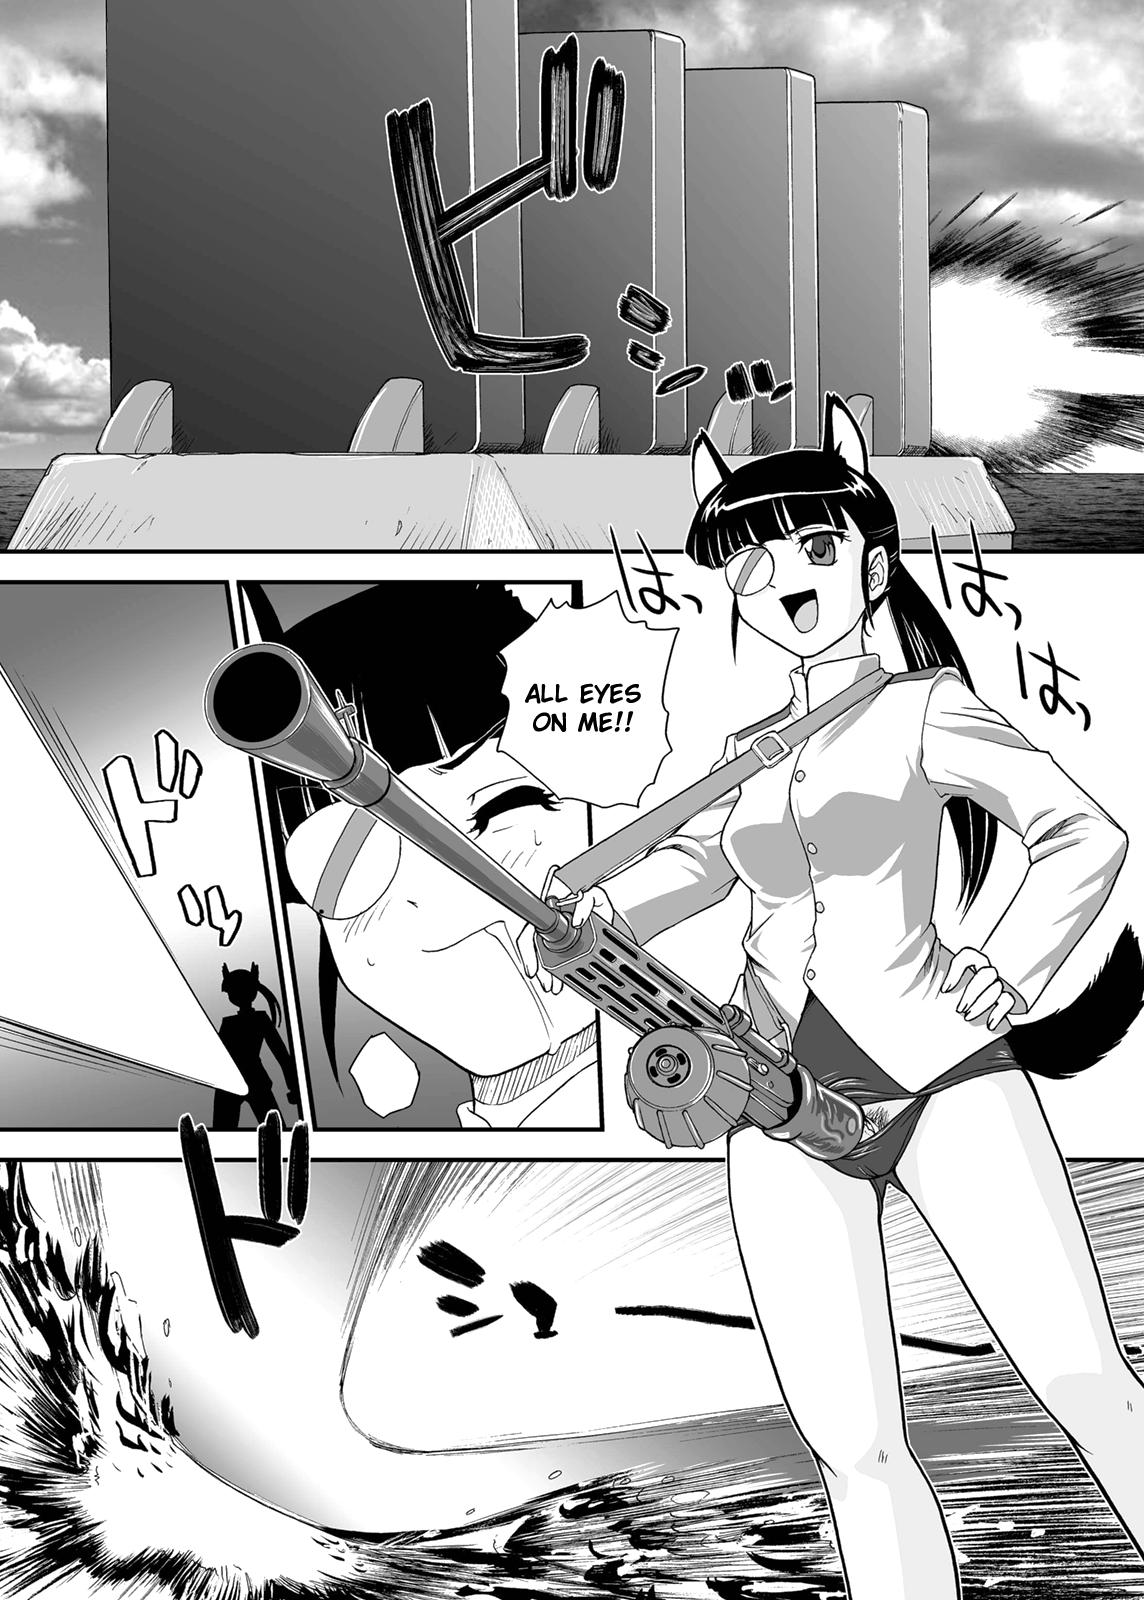 Ex Gf Chin ★ ja Naikara Hazukashiku Naimon!!! | It's Not A Real Dick, So There's Nothing to Be Embarrassed About!!! - Strike witches Small Boobs - Page 5